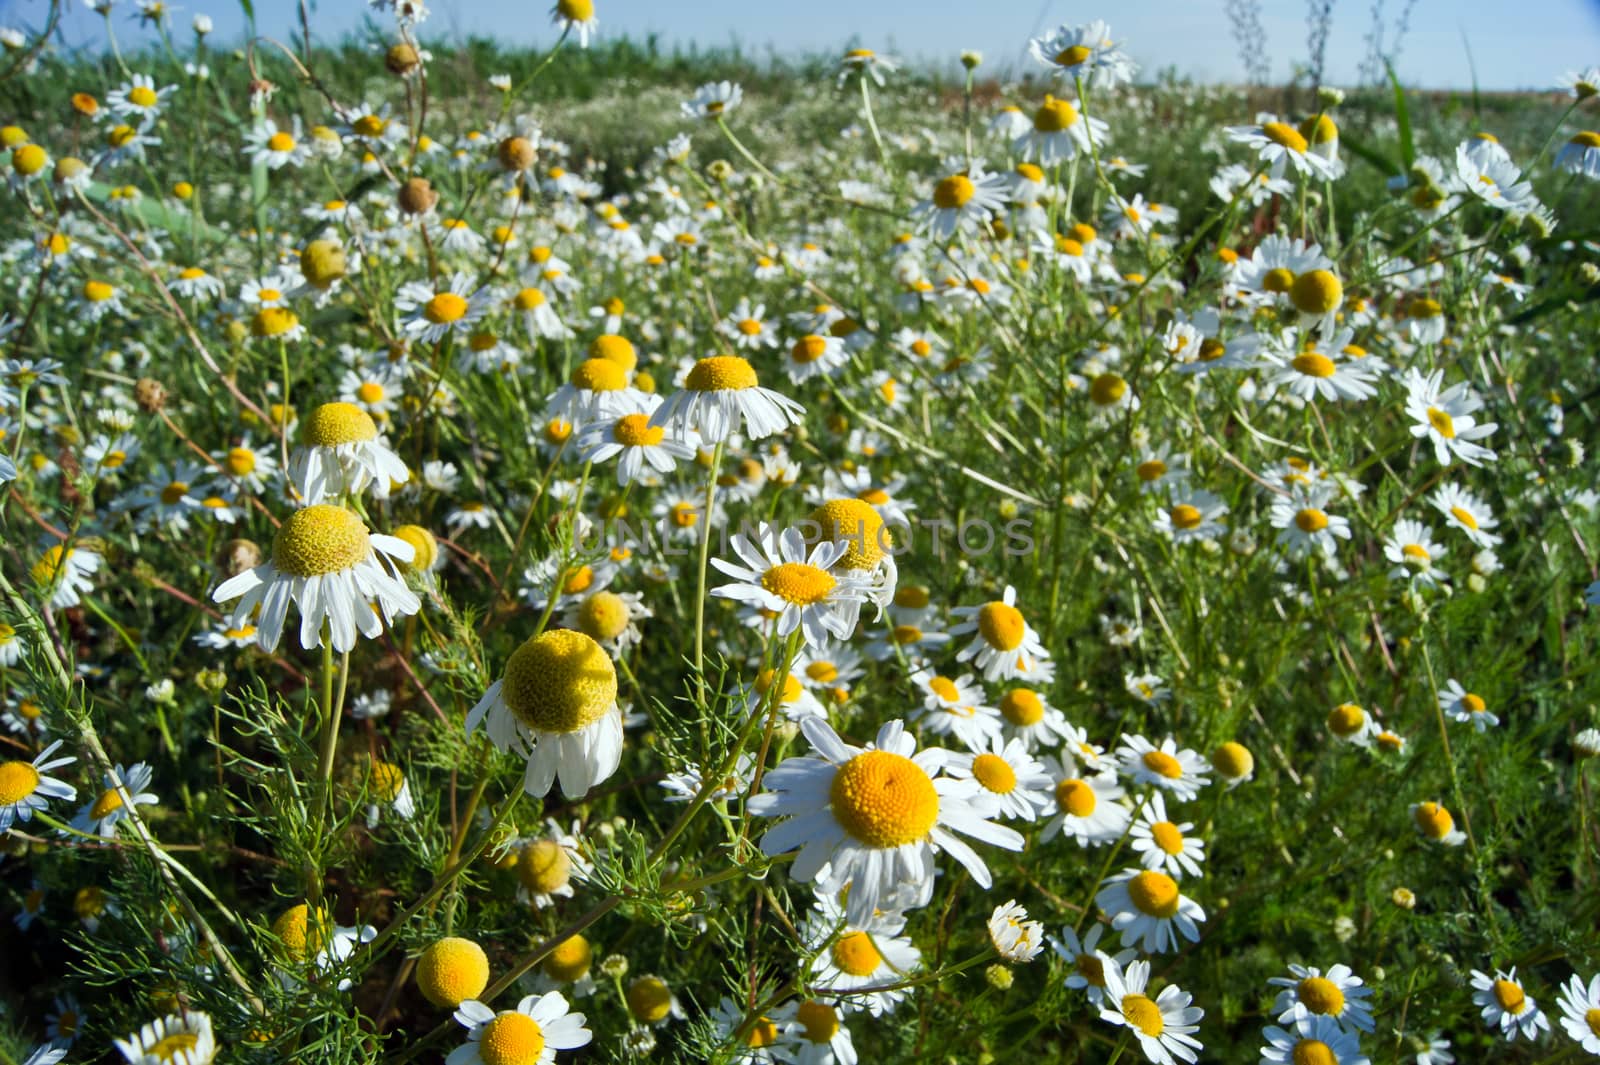 The field of medicinal plants blooming chamomile.